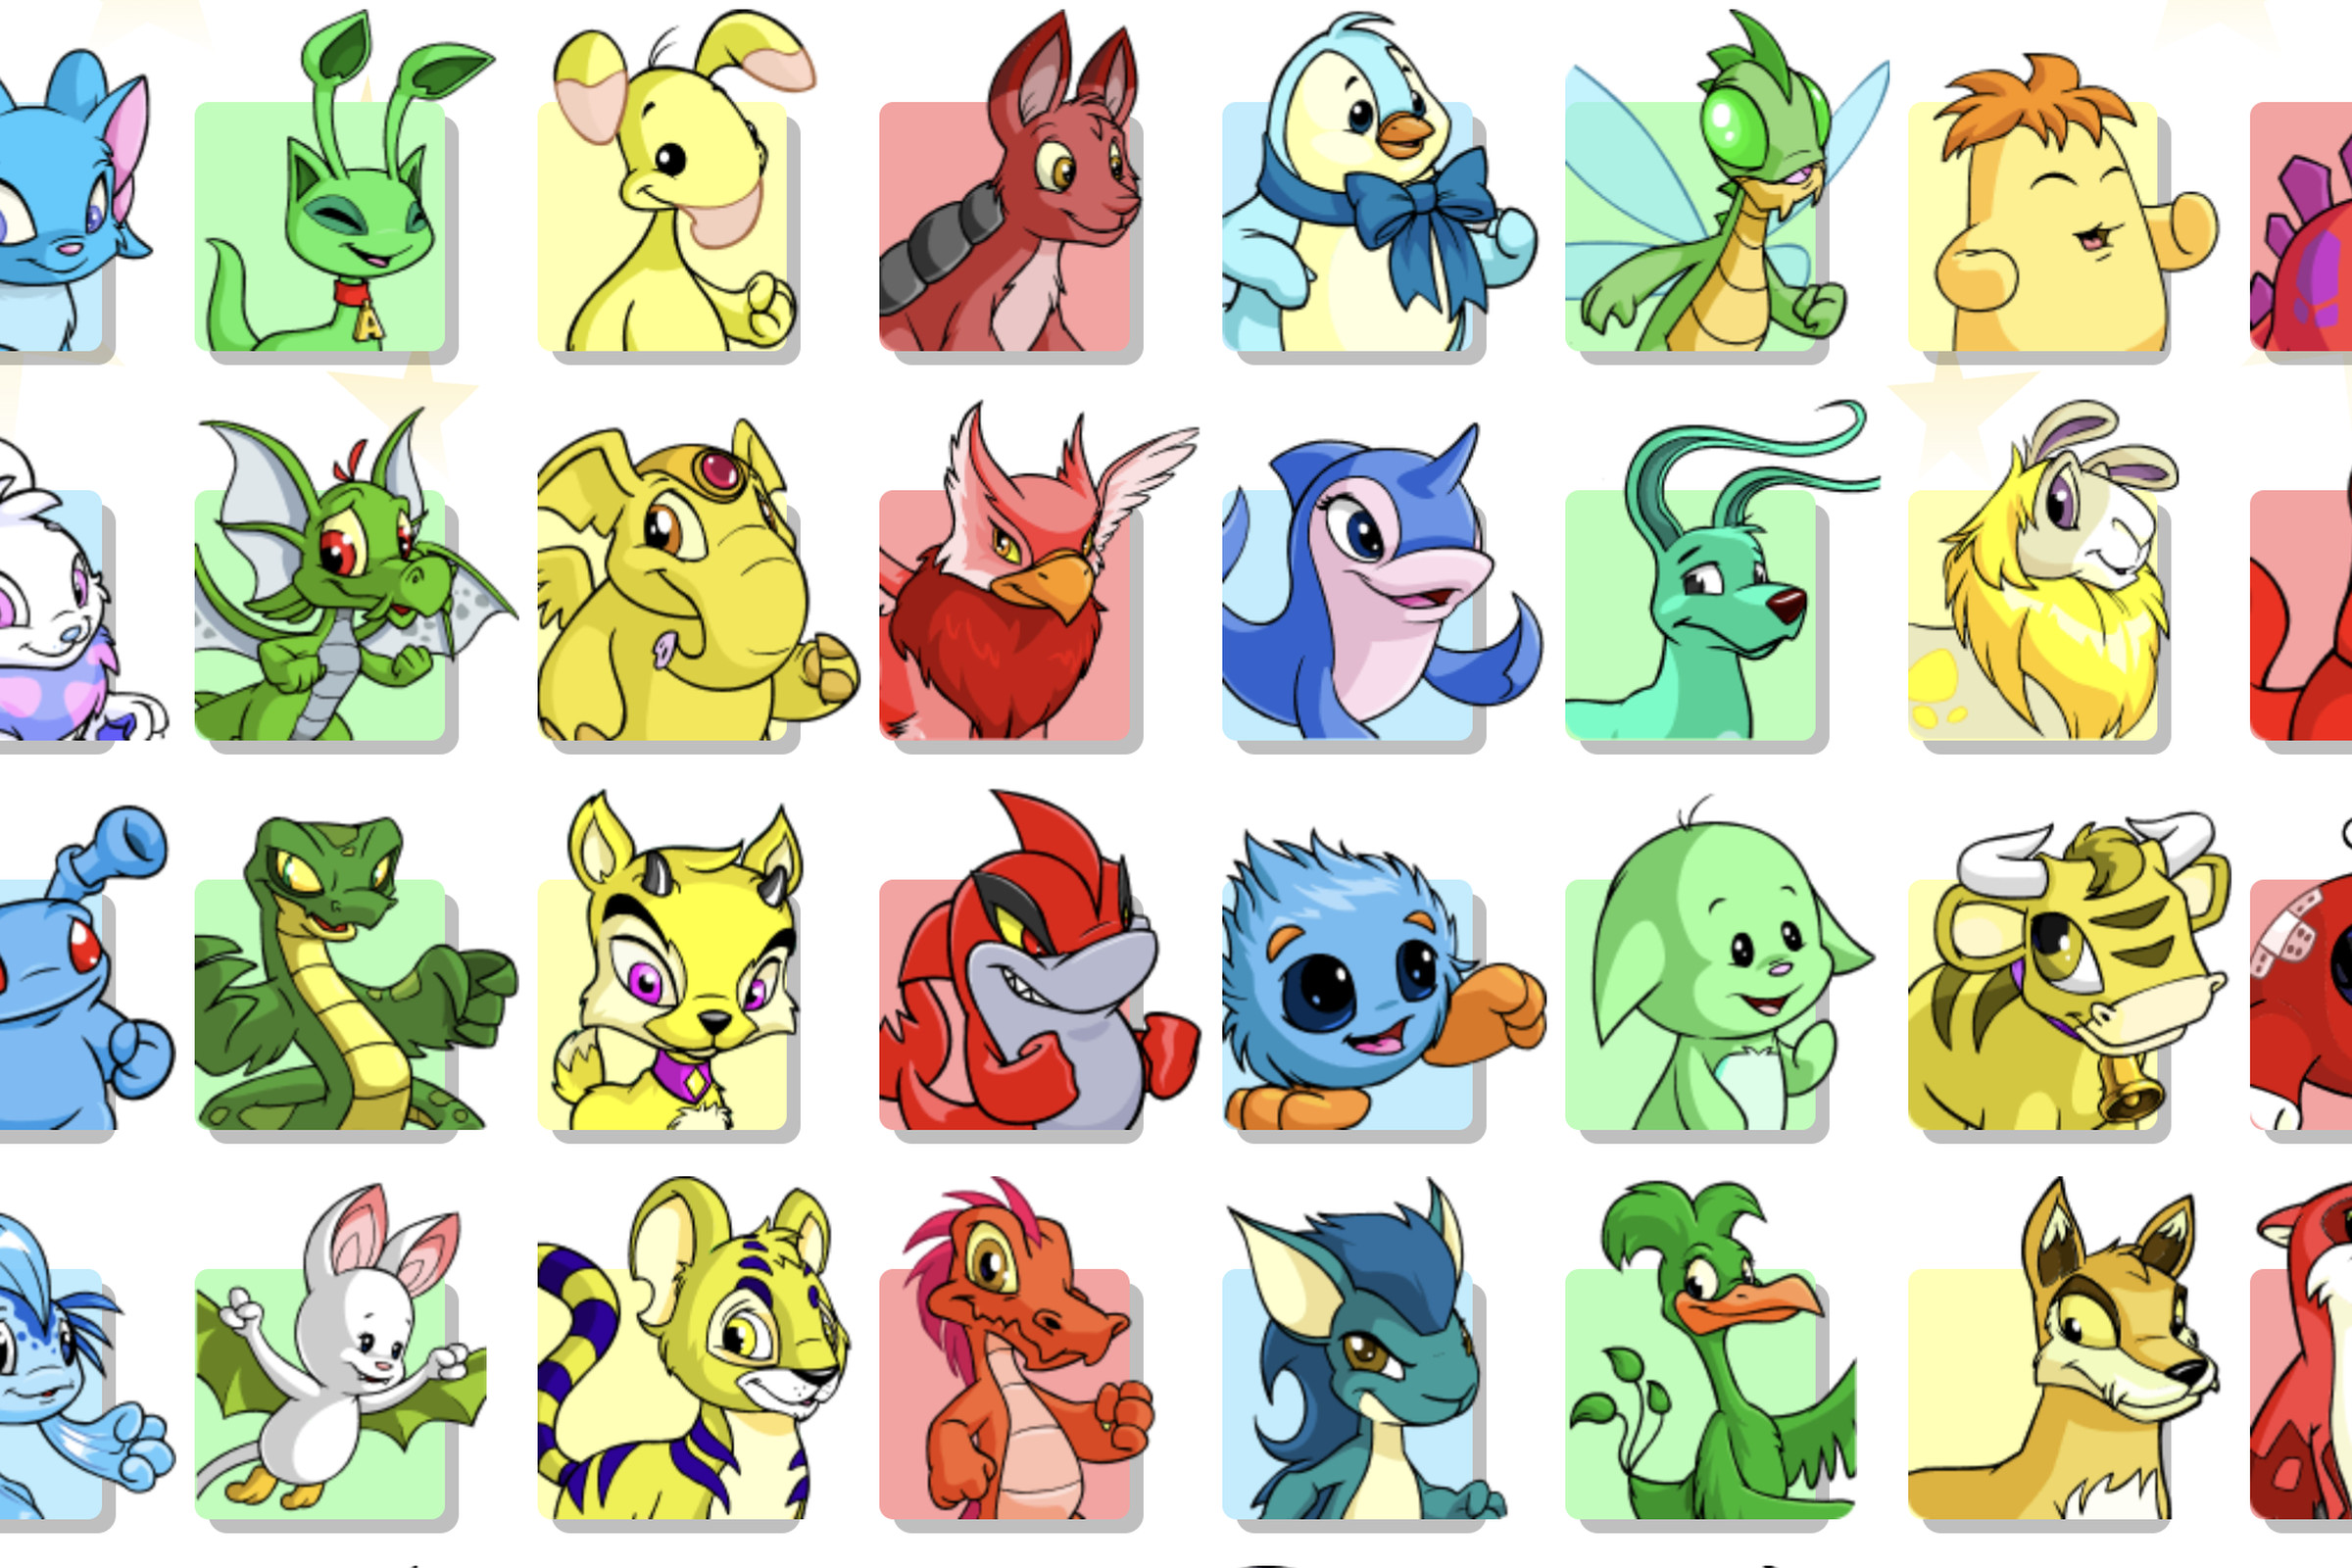 Pictures of many Neopets on the Neopets website.